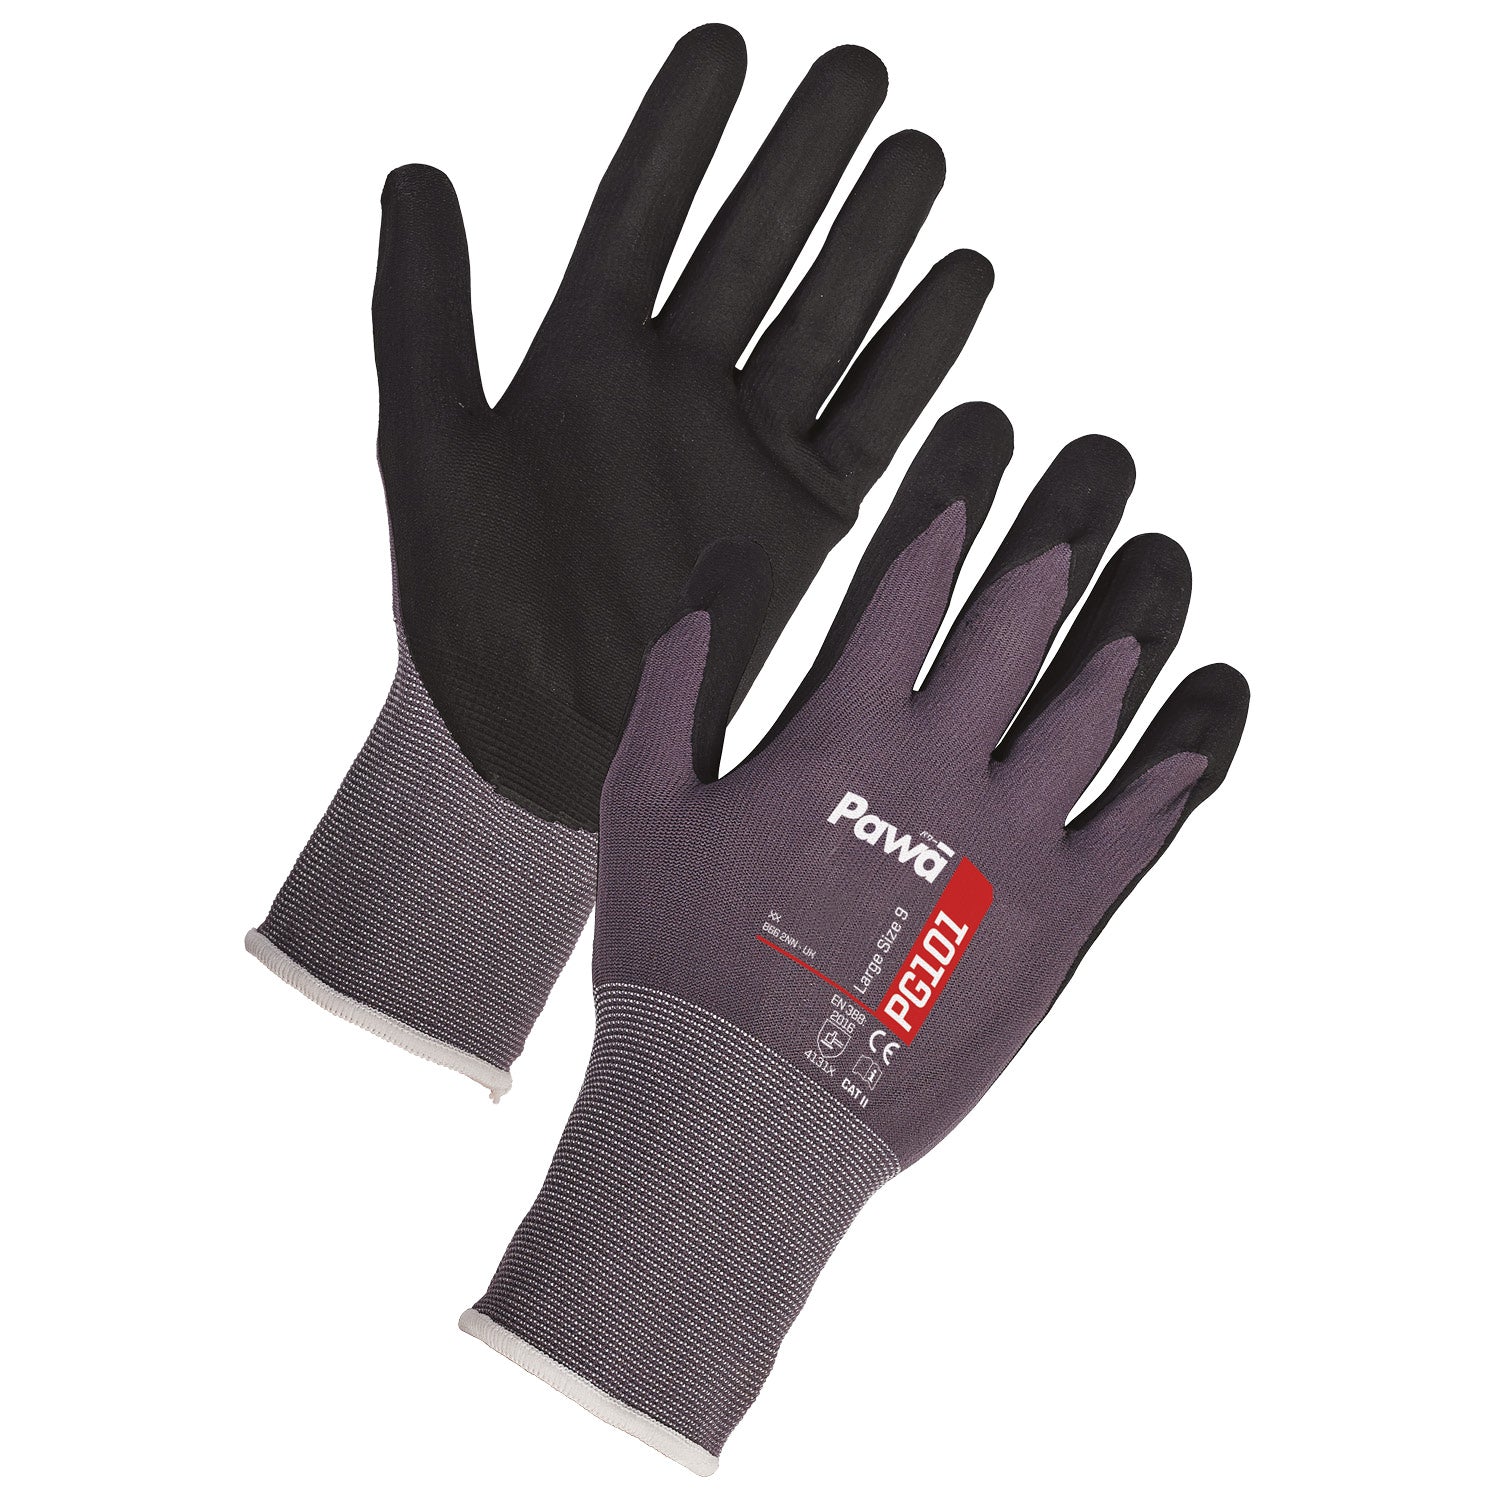 Supertouch Pawa PG101 Gloves